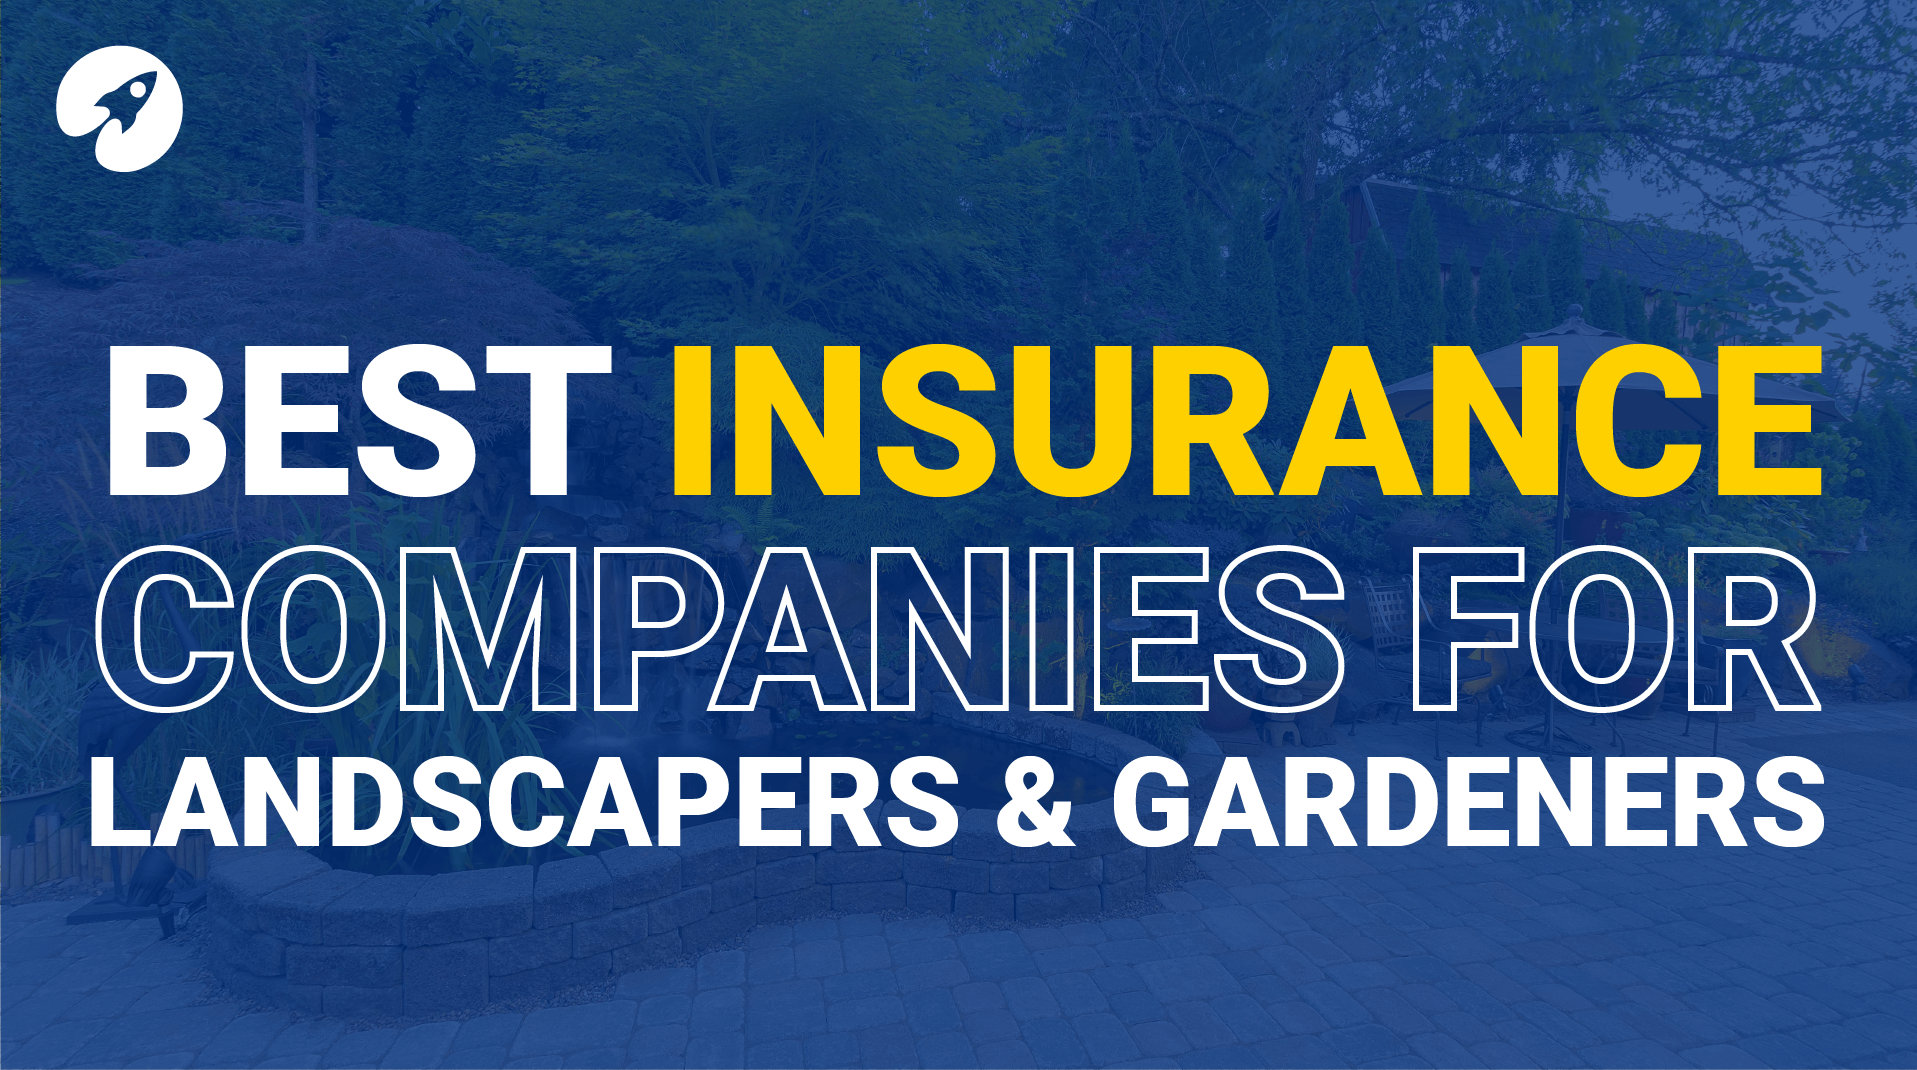 Best insurance companies for landscapers